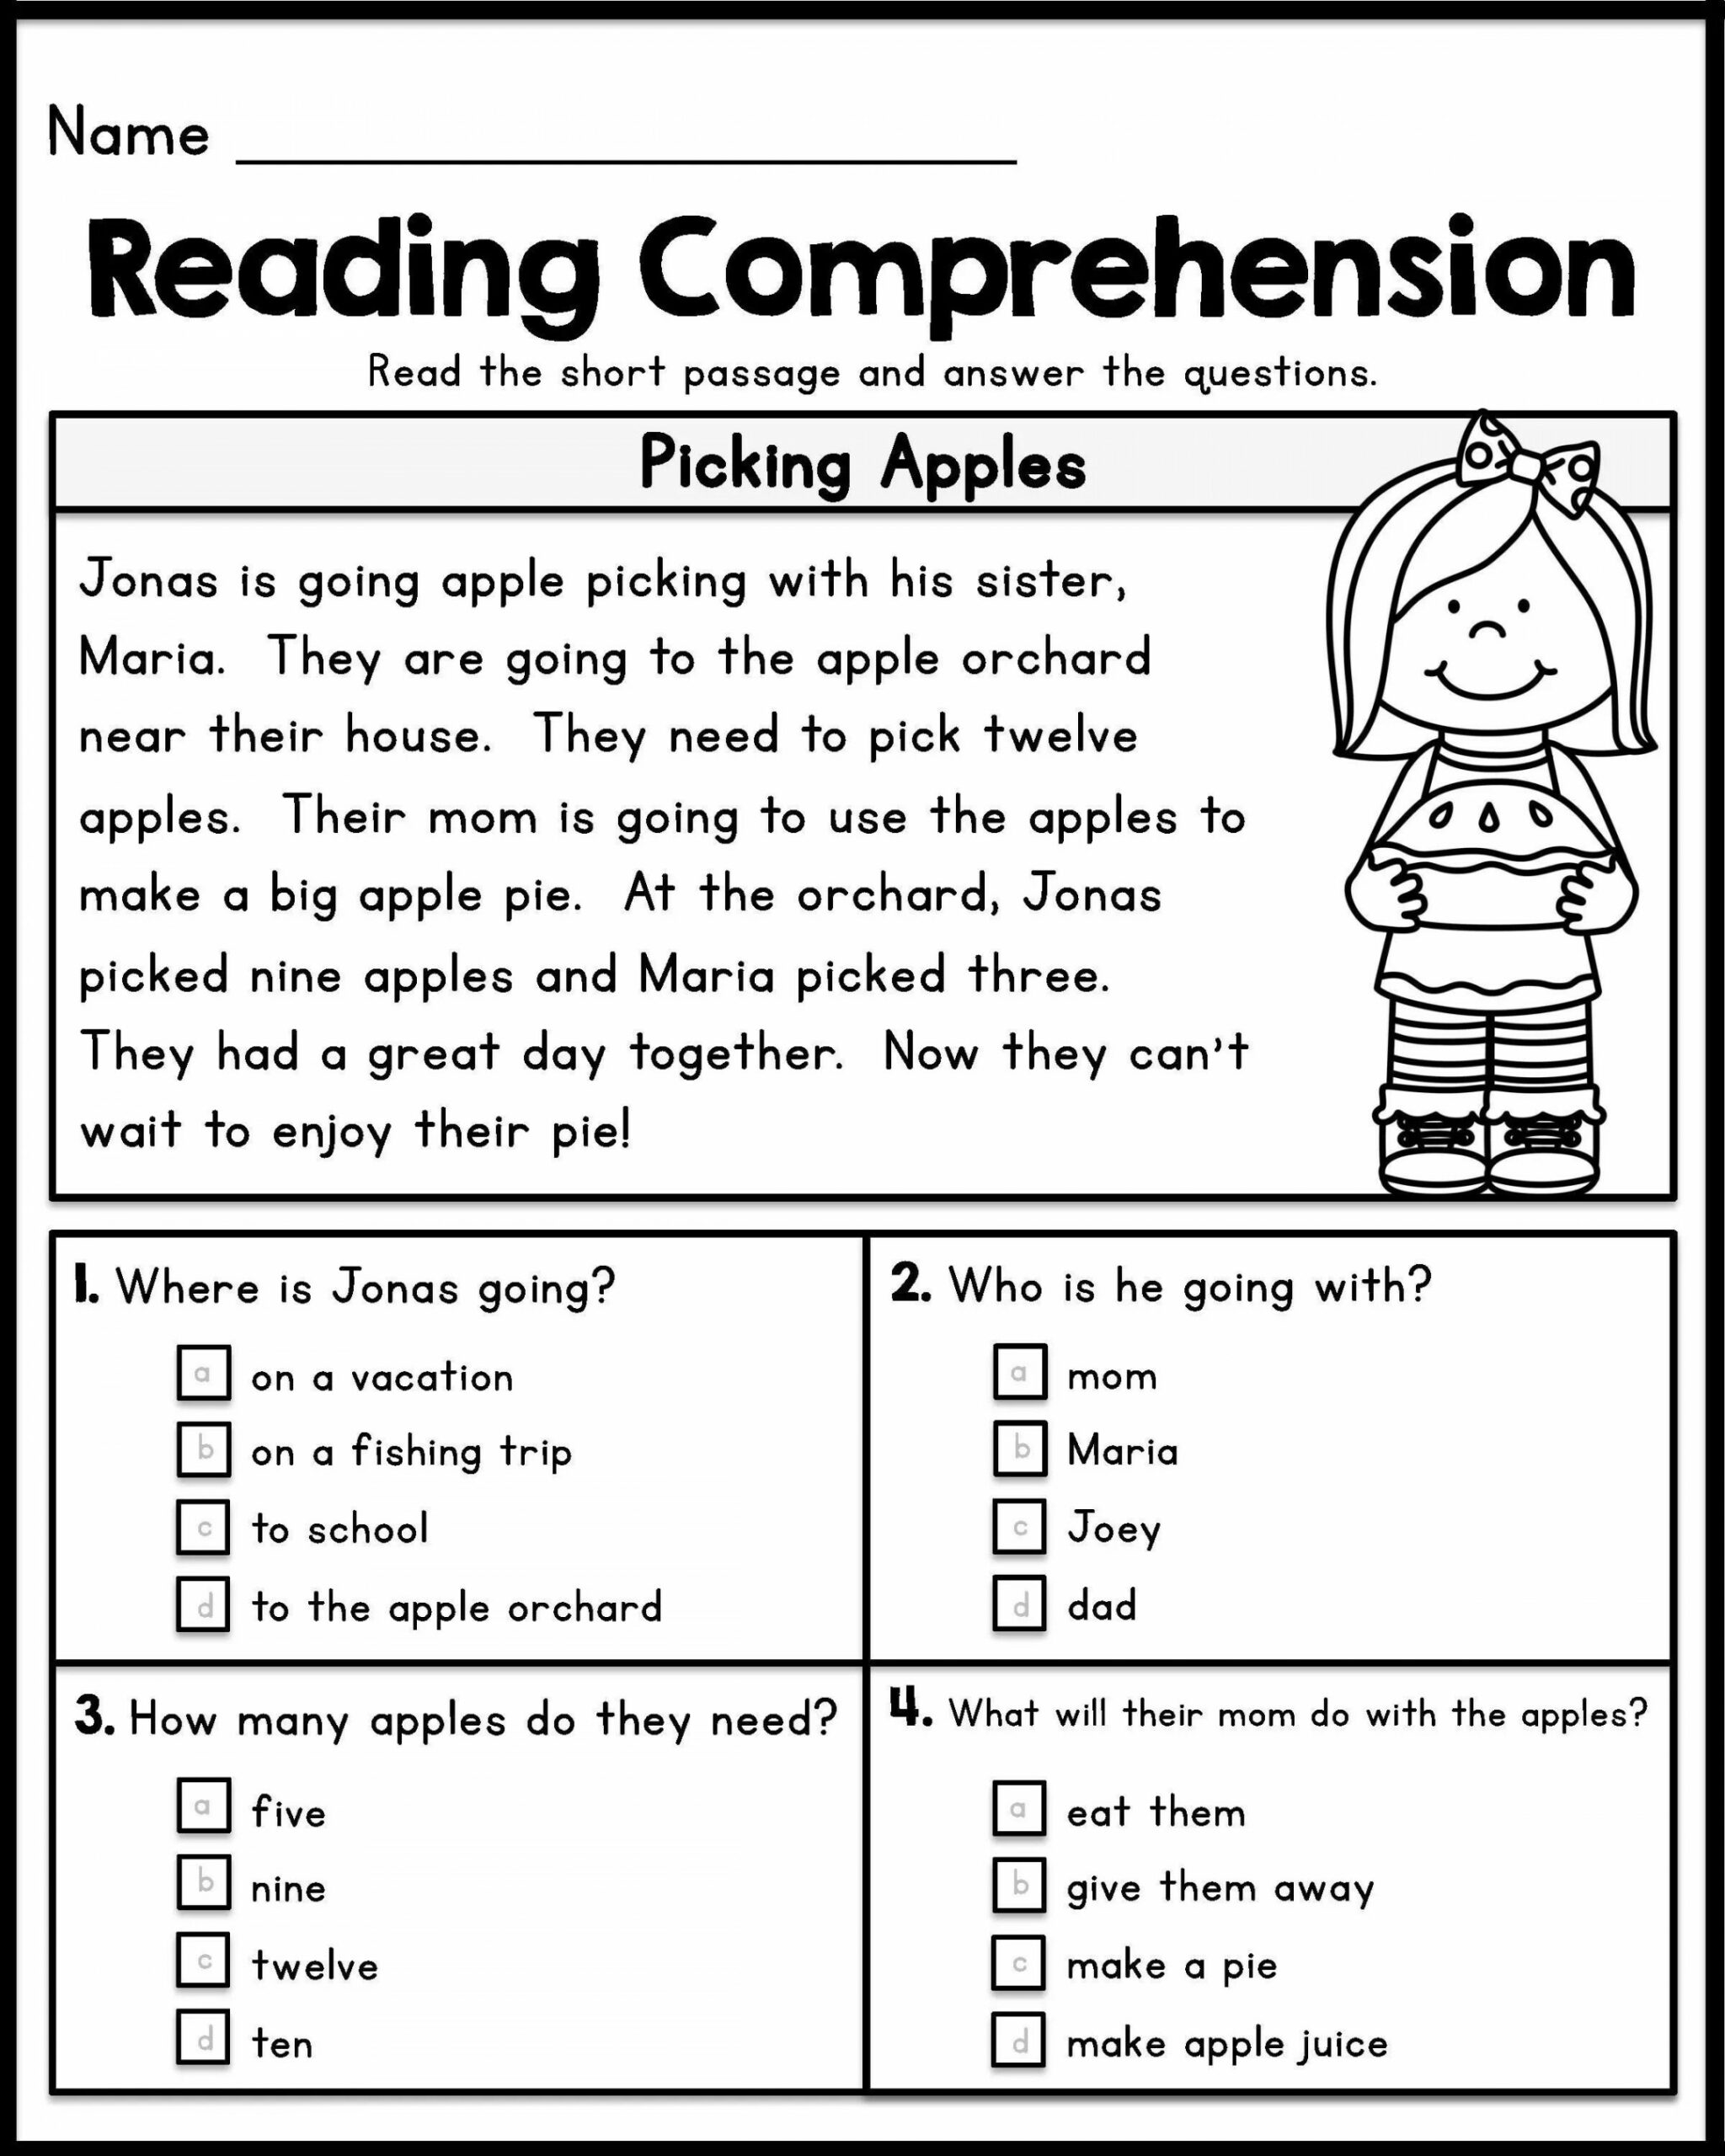 St Grade Reading Comprehension Worksheets Pdf is really a shee